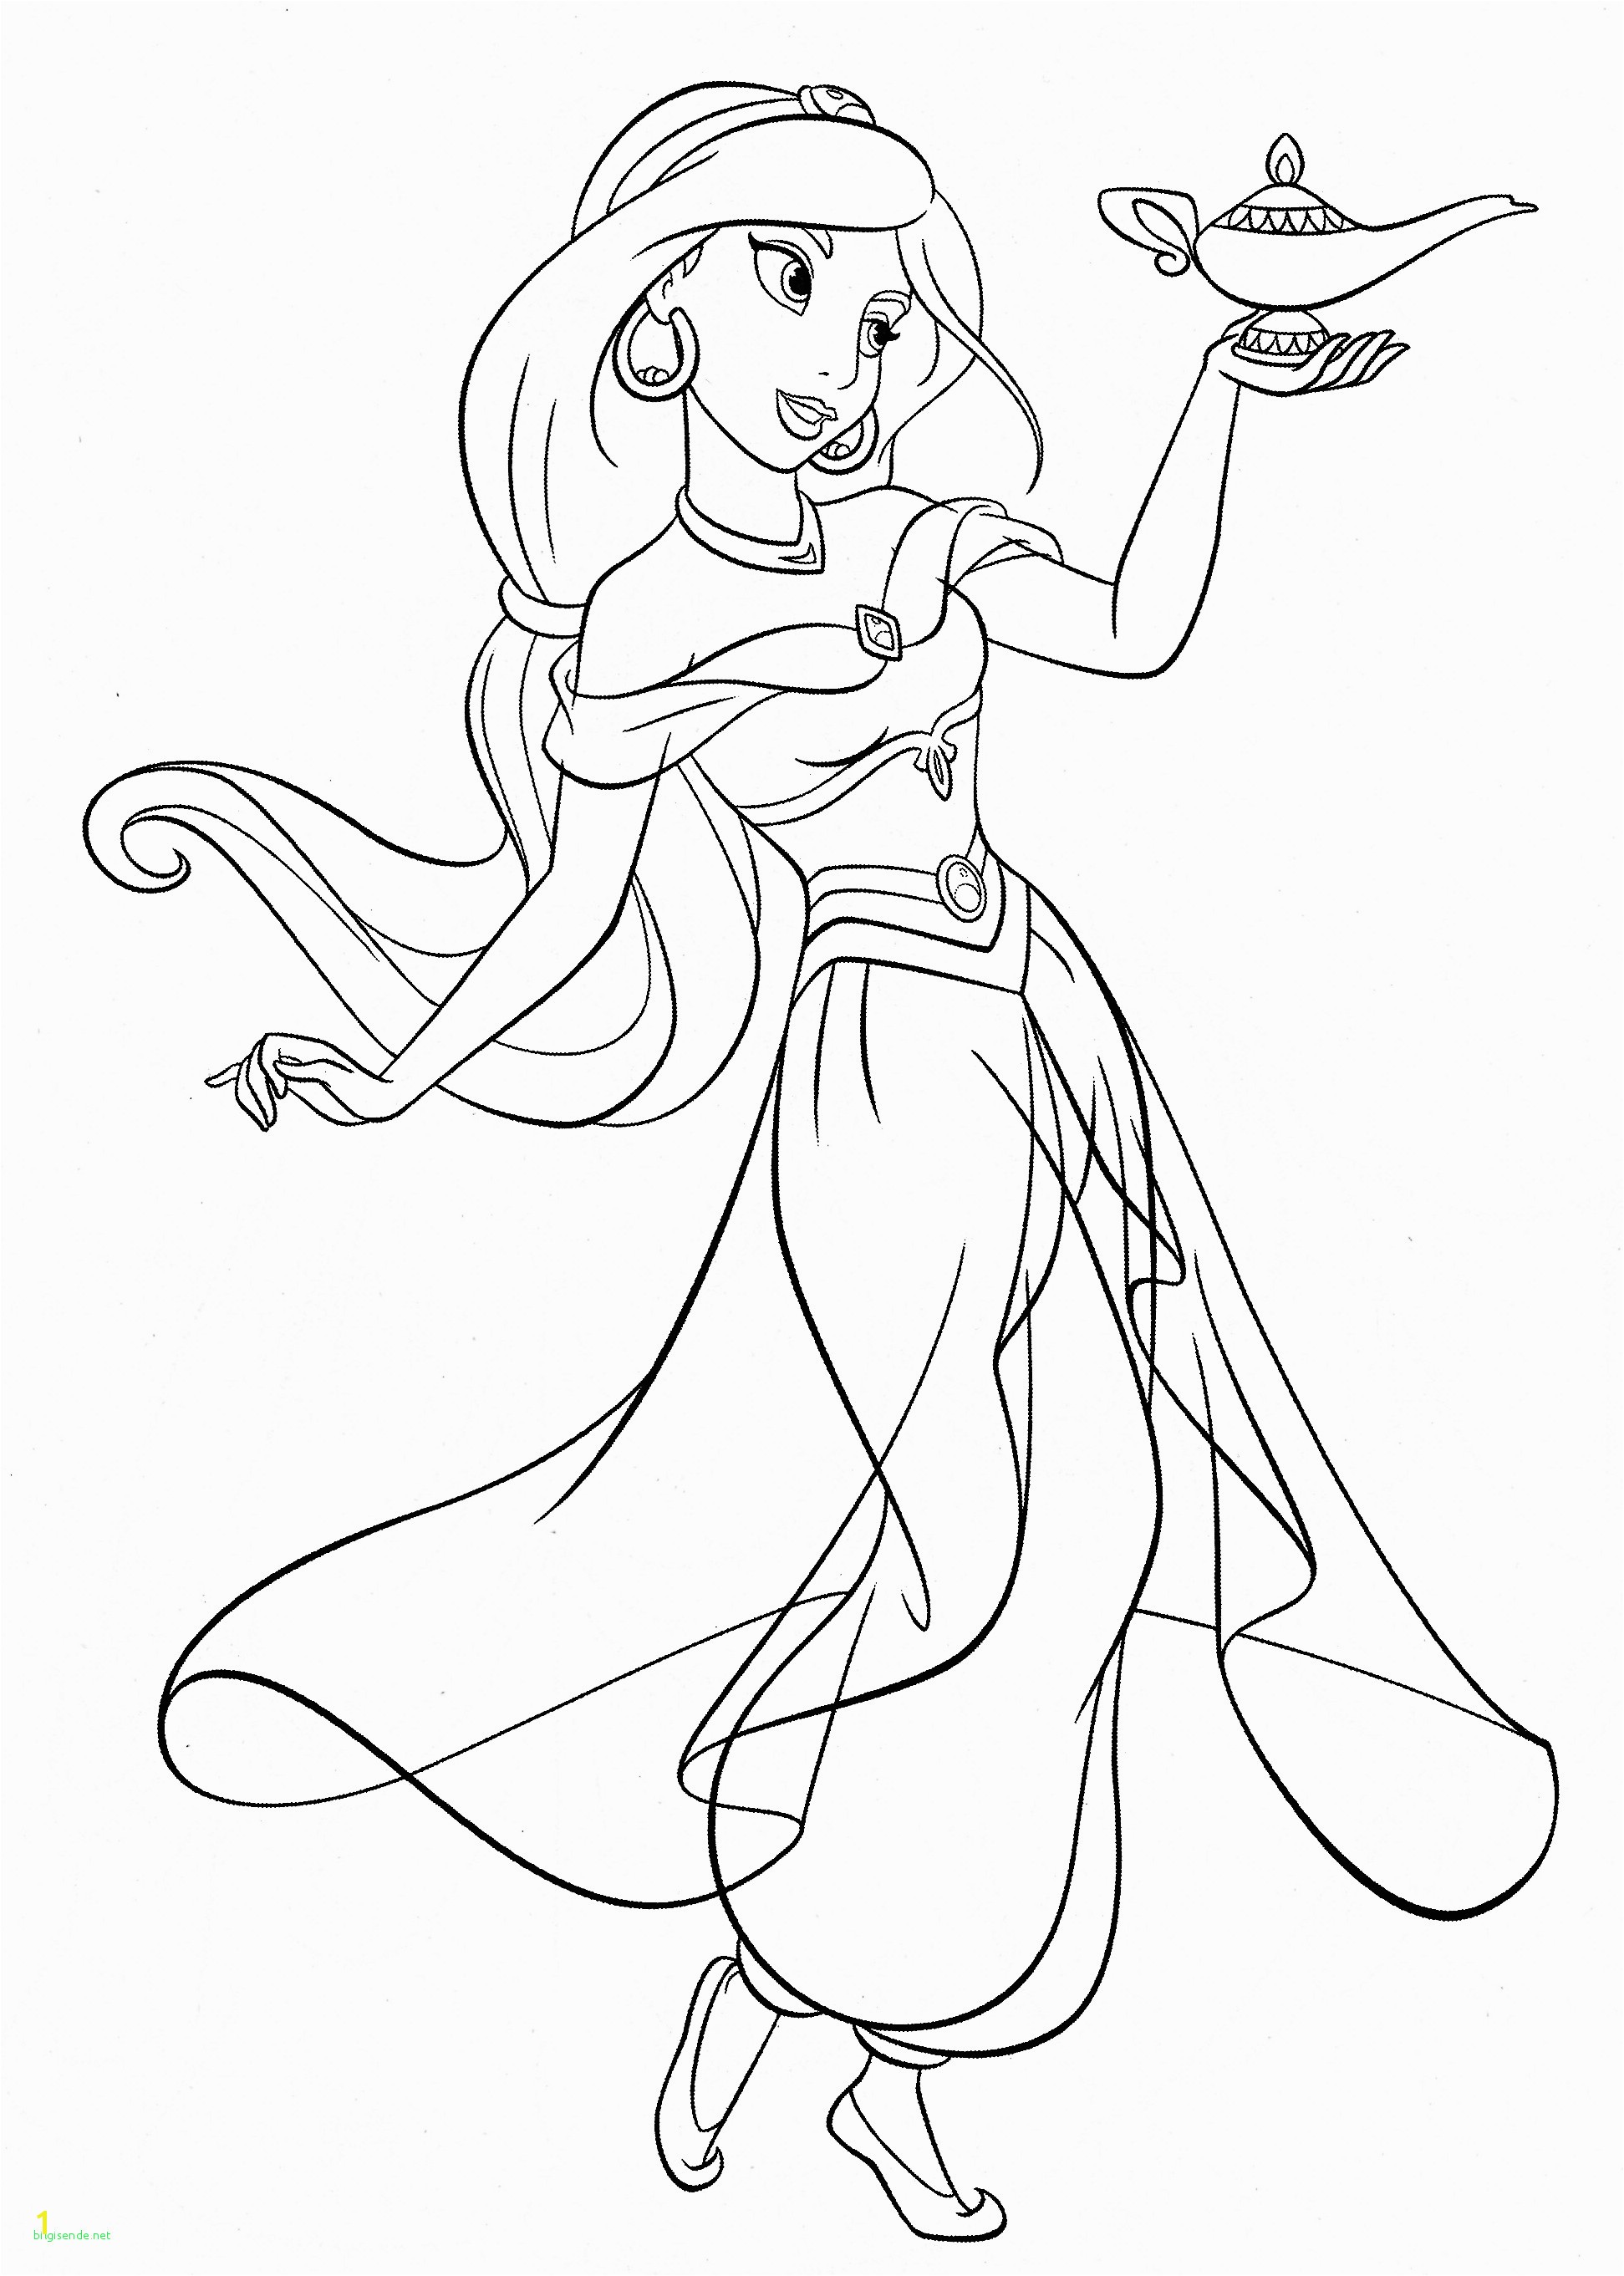 Coloring Disney Princess Games New Coloring Book and Pages Jasmine Coloring Pages Printable Free Inspirational